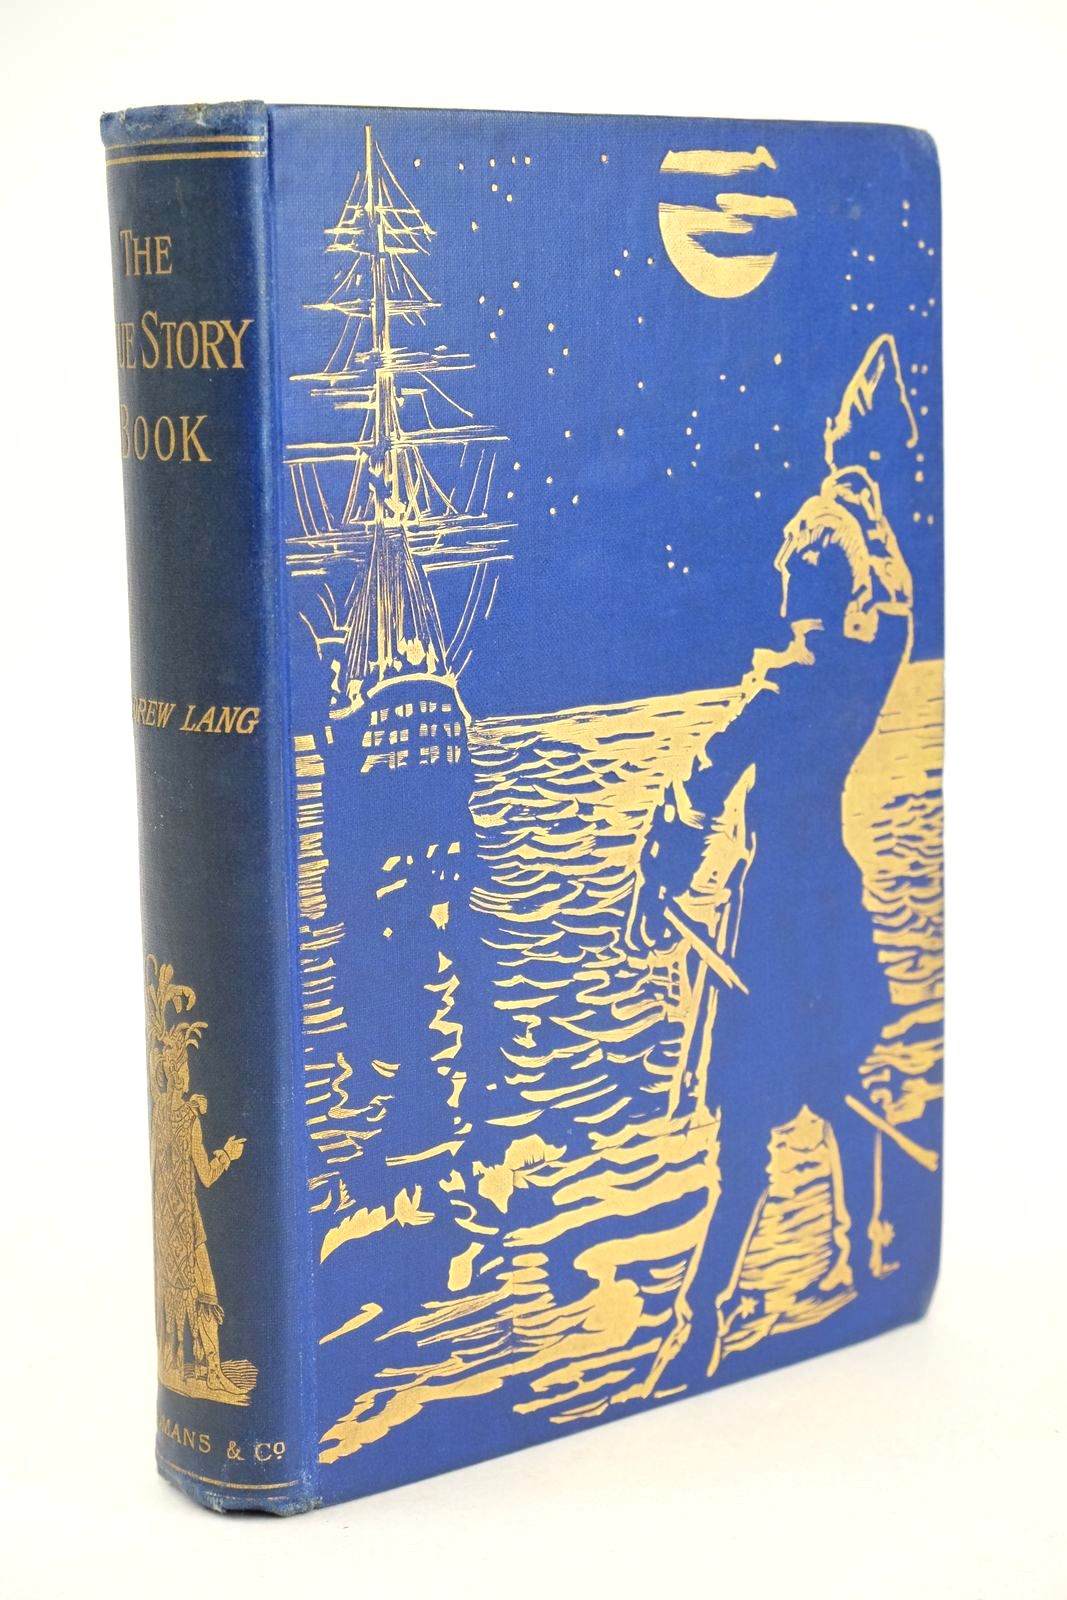 Photo of THE TRUE STORY BOOK written by Lang, Andrew illustrated by Bogle, Lockhart Davis, Lucien Ford, H.J. Kerr, C. H. M. Speed, Lancelot published by Longmans, Green &amp; Co. (STOCK CODE: 1325634)  for sale by Stella & Rose's Books